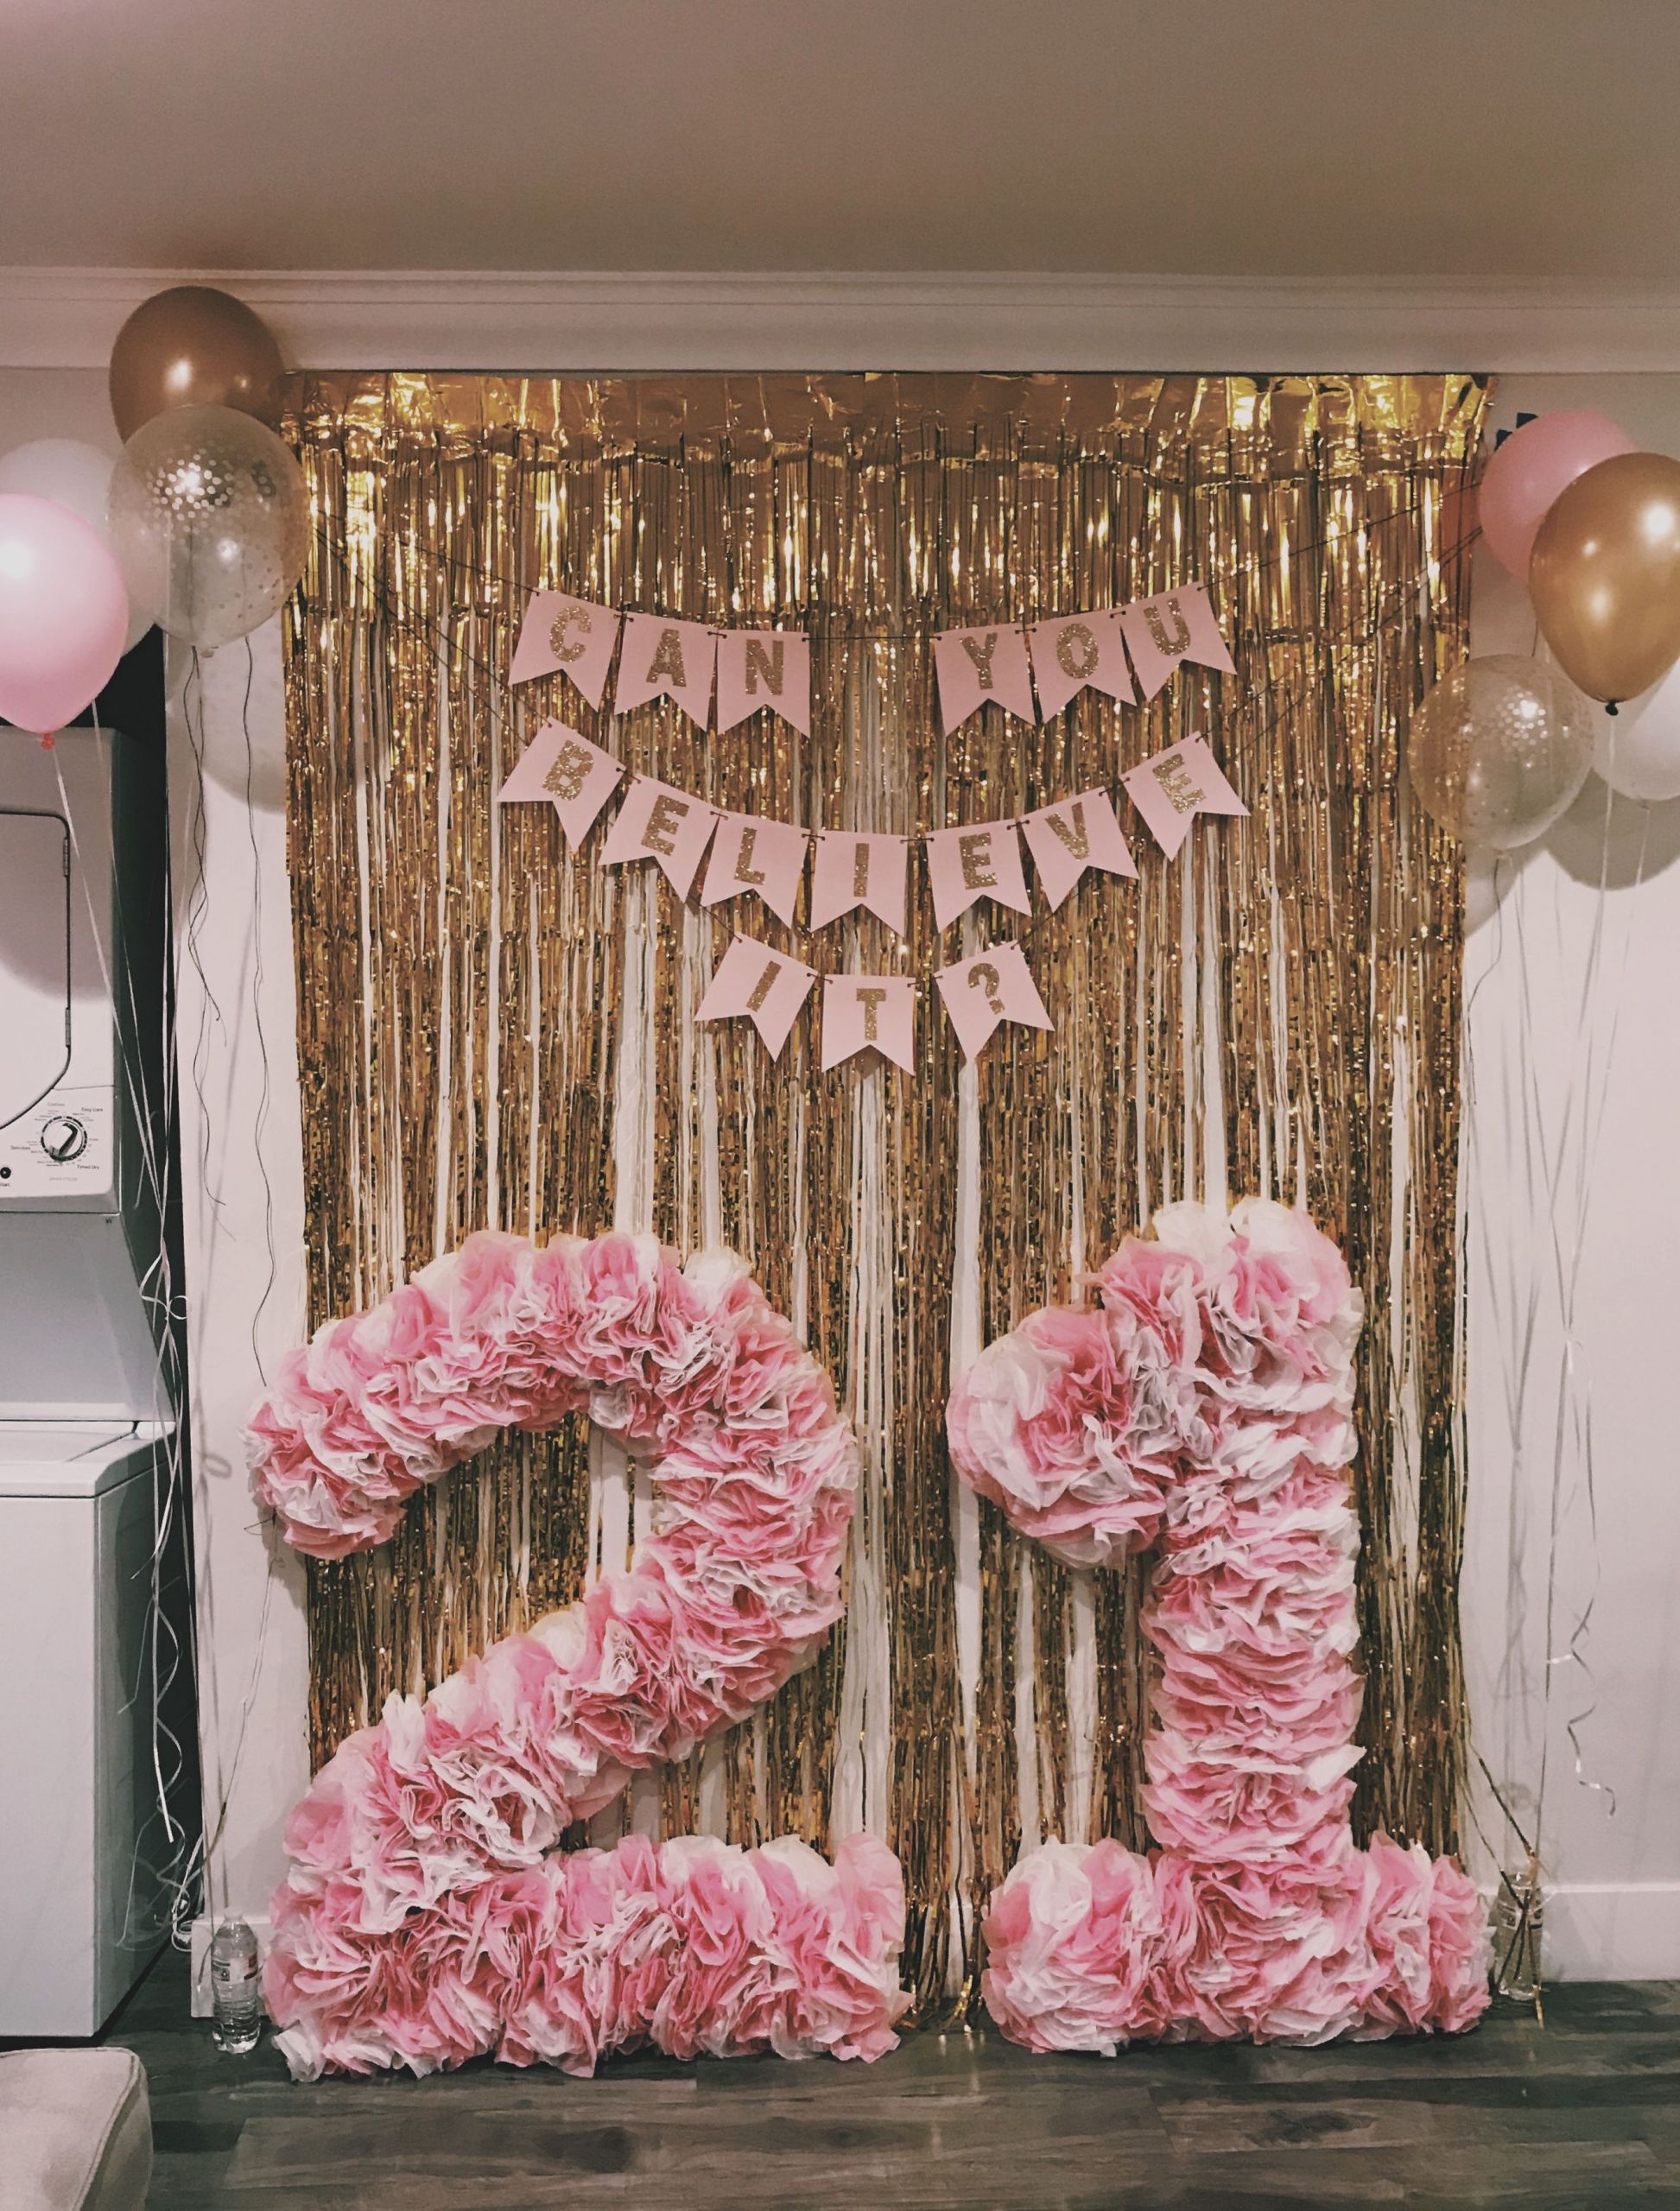 DIY Party Decor Ideas
 DIY tissue paper numbers White and pink tissue hot glued